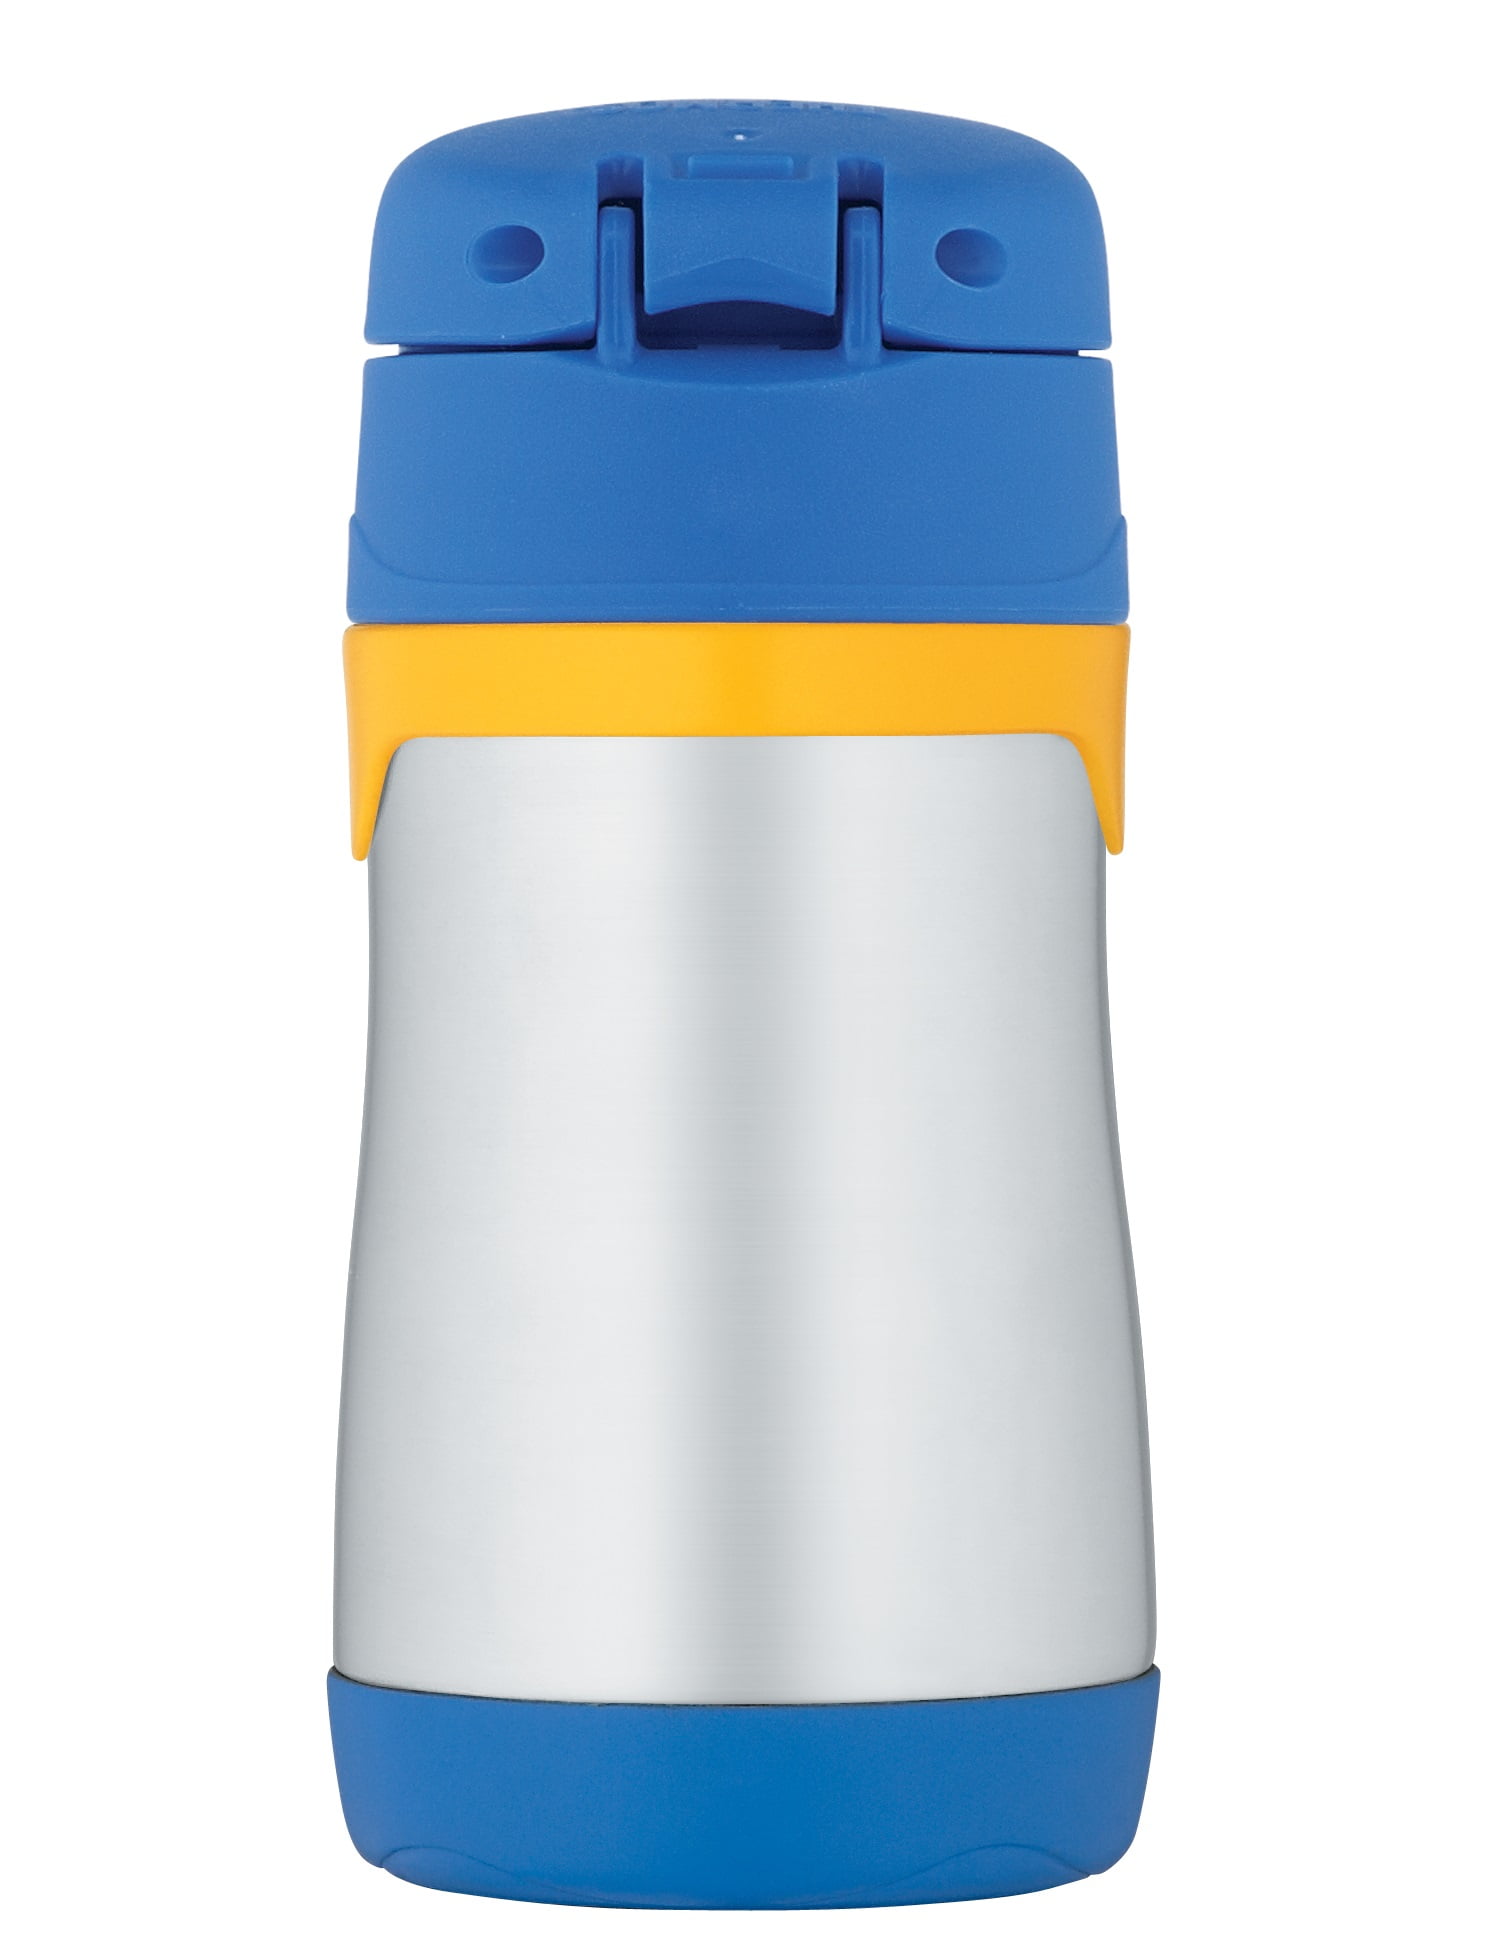 Thermos Foogo Straw Bottle Review: a Durable Water Bottle for Toddlers